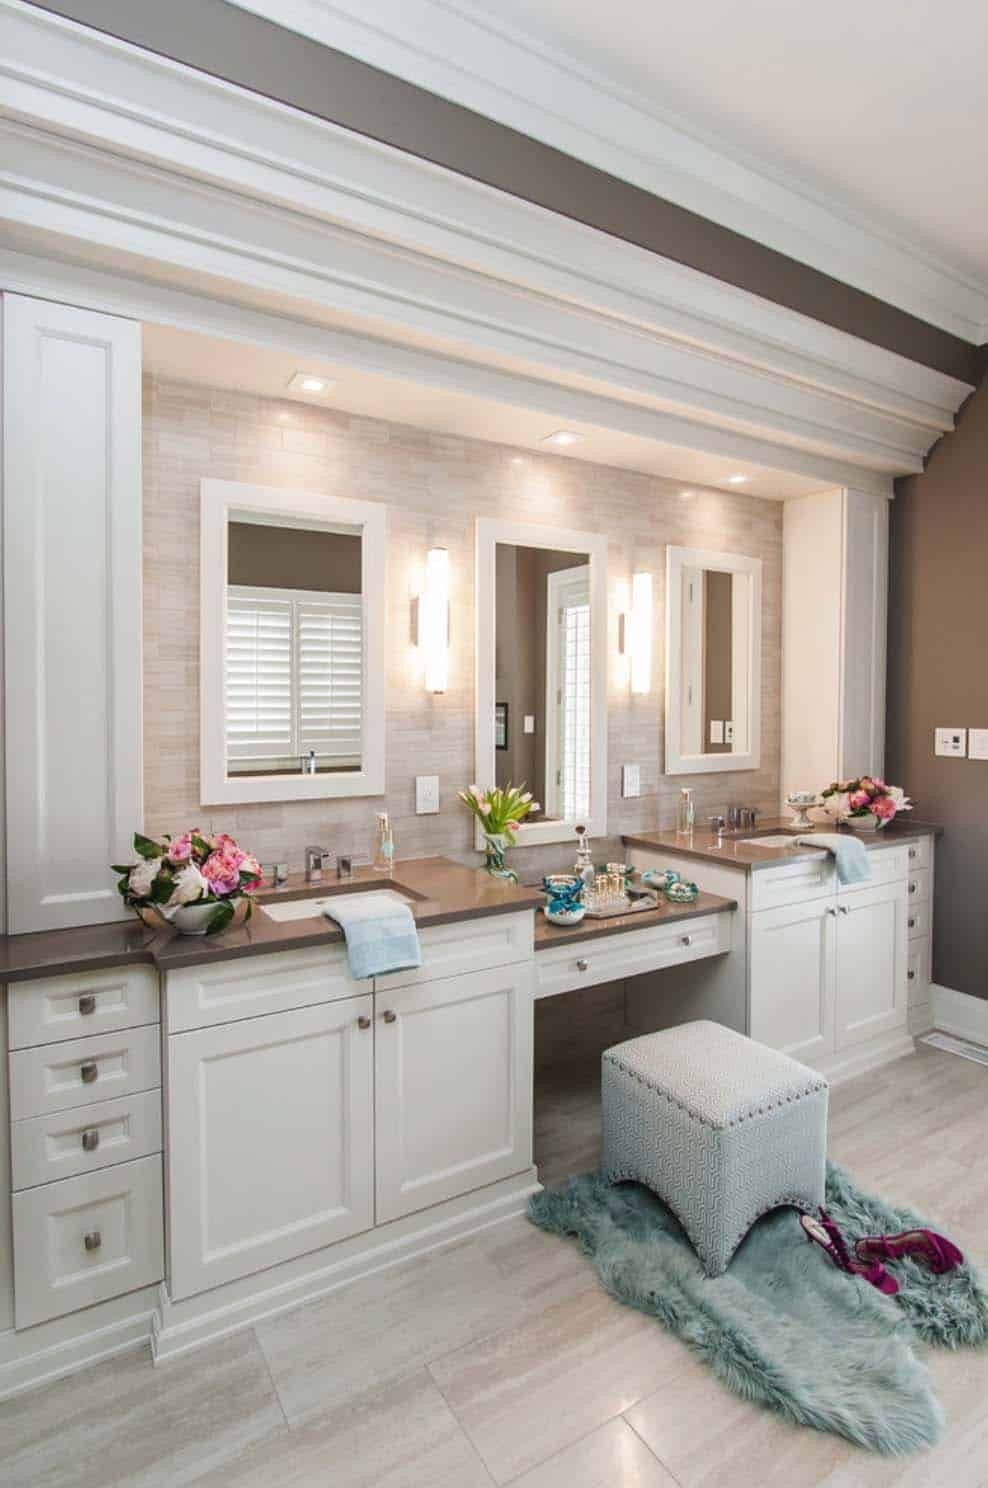 Bathroom Decor Pictures
 53 Most fabulous traditional style bathroom designs ever